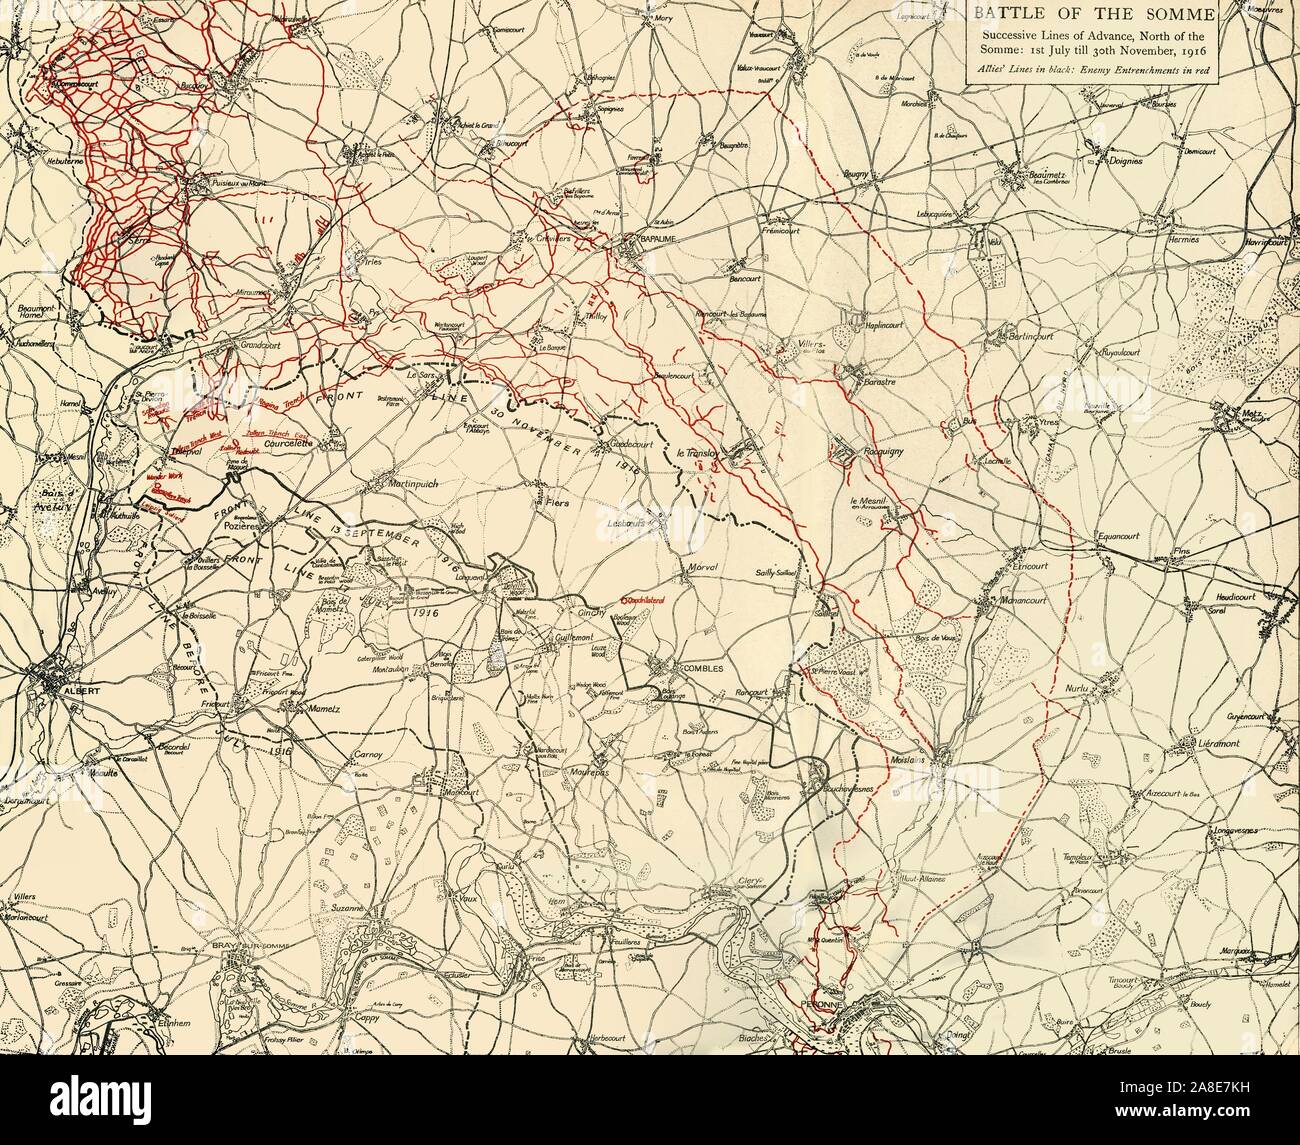 'Battle of the Somme', First World War, 1916, (c1920). 'Successive Lines of Advance, North of the Somme: 1st July till 30th November, 1916'. Map of northern France showing 'Allies' Lines in black, Enemy Entrenchments [Germans] in red'. From &quot;The Great World War: A History&quot;, Volume VI, edited by Frank A Mumby. [The Gresham Publishing Company Ltd, London, c1920] Stock Photo